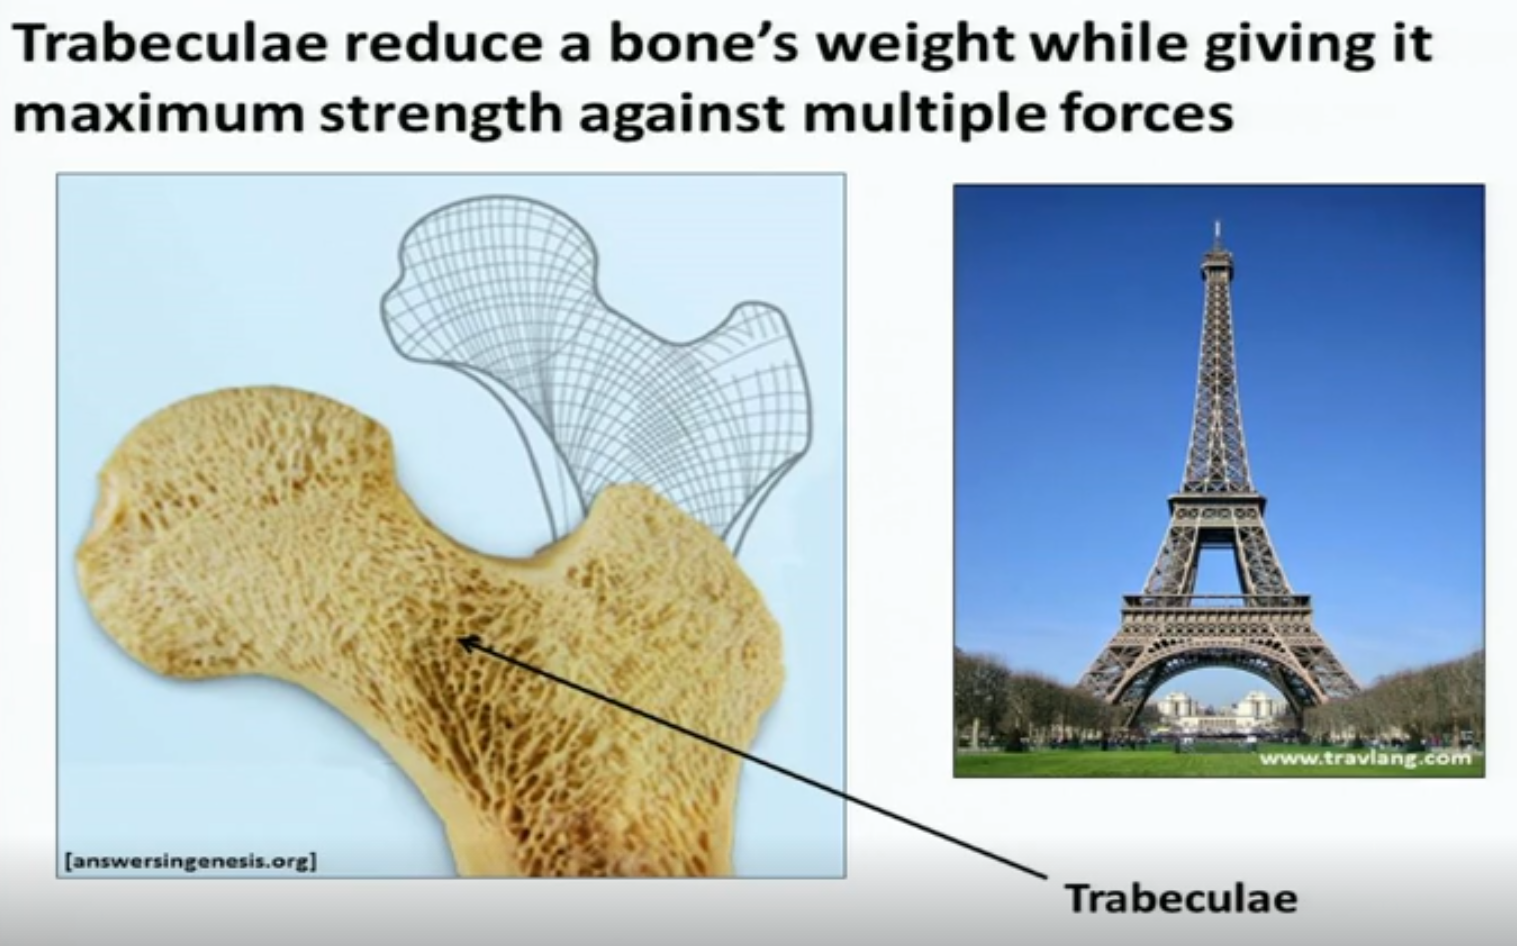 gray slide image with the title Trabeculae and the following bullet points: Cancellous bone, anastomosing bony spicules, mathematically precise alingment, strength during tension/compression, discoverd in 1850s, inspired Eiffel Tower design.